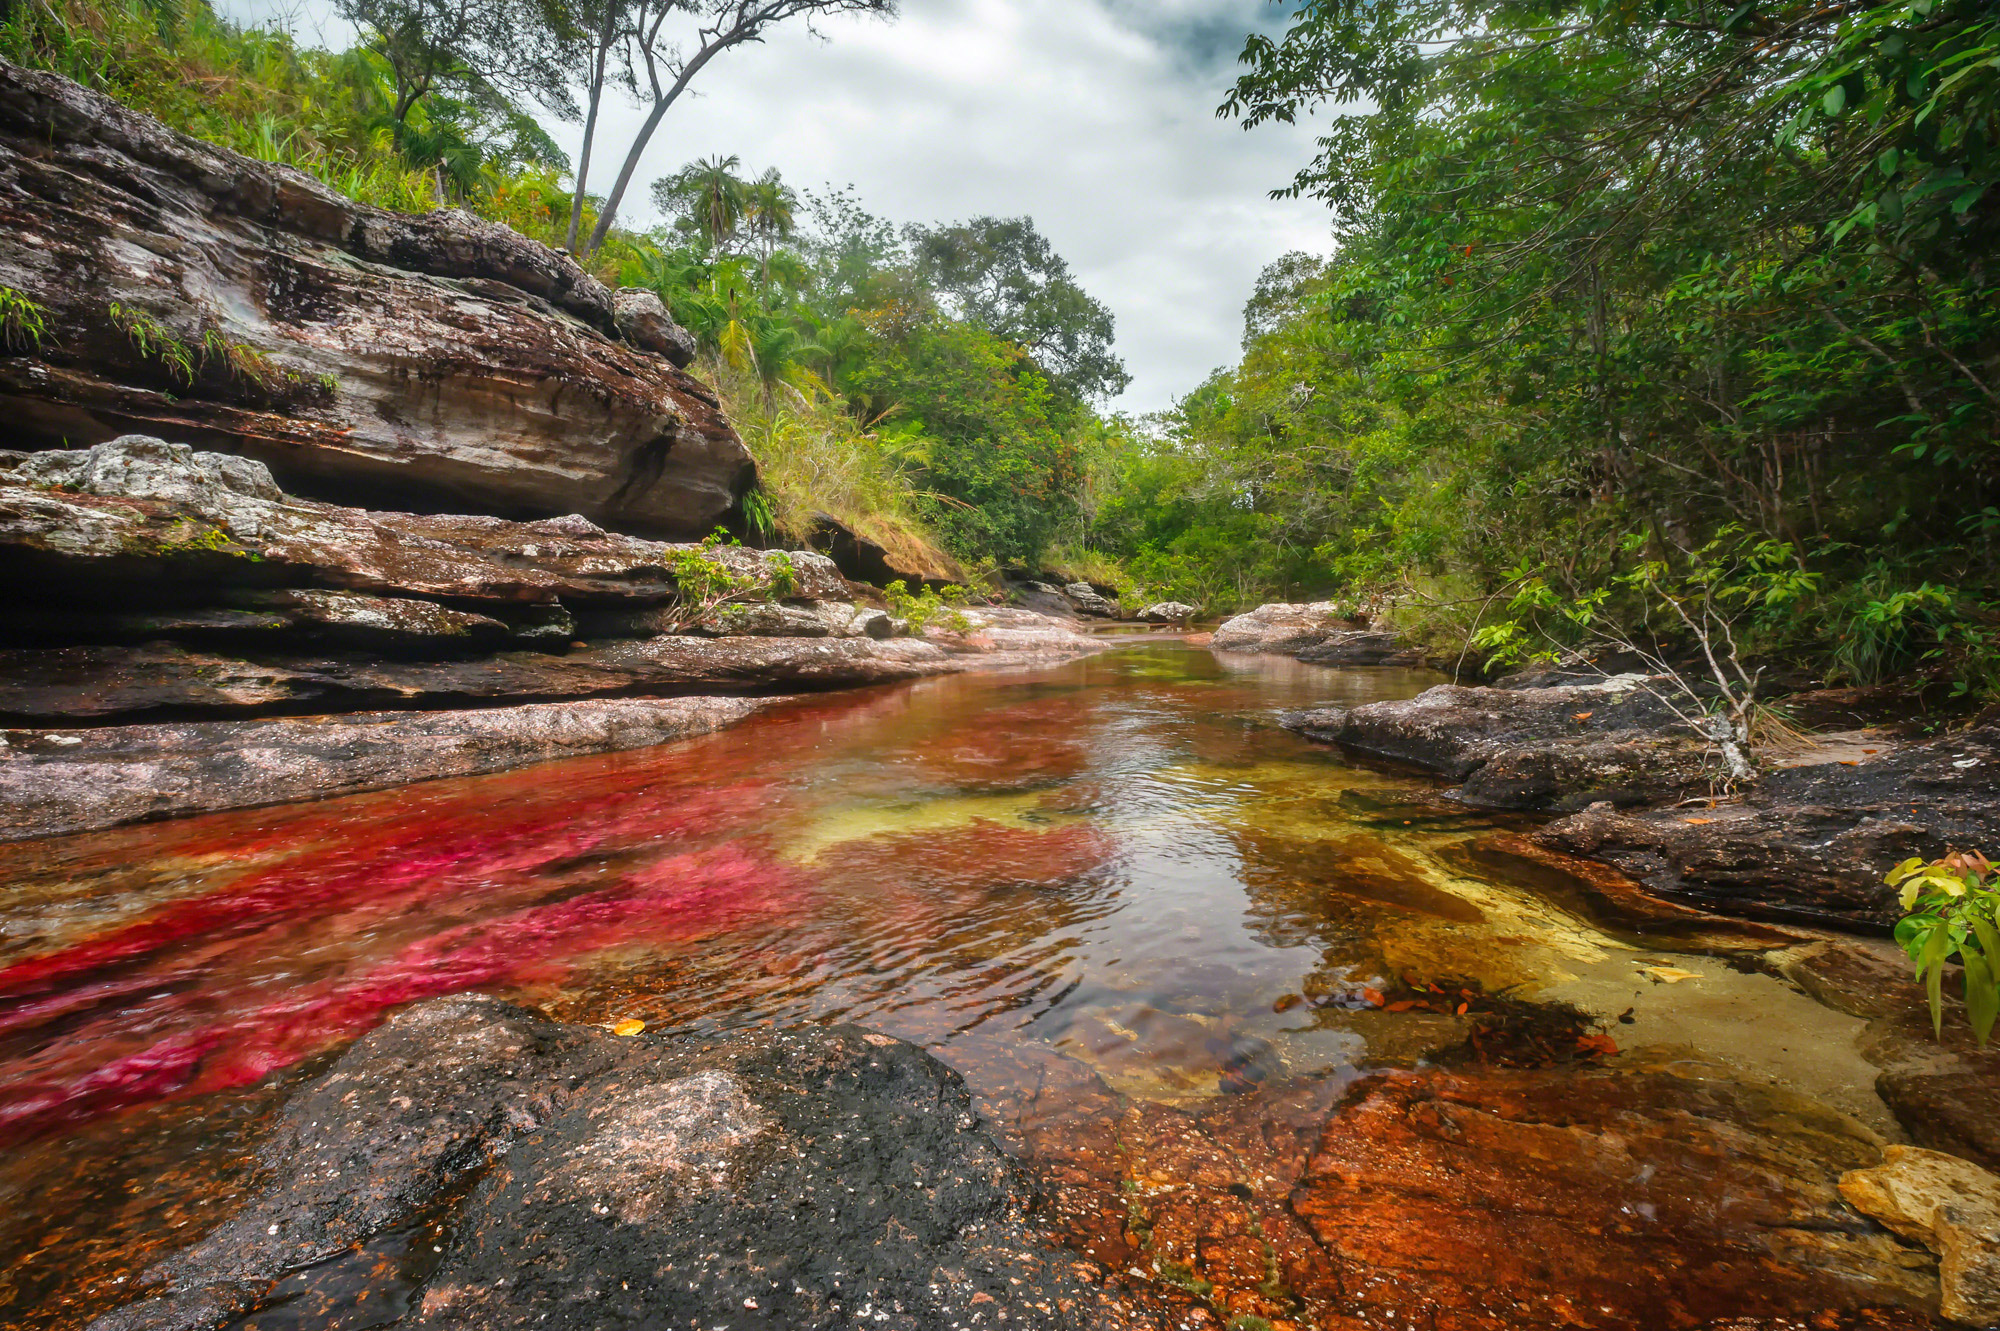 HQ Caño Cristales Wallpapers | File 1162.14Kb